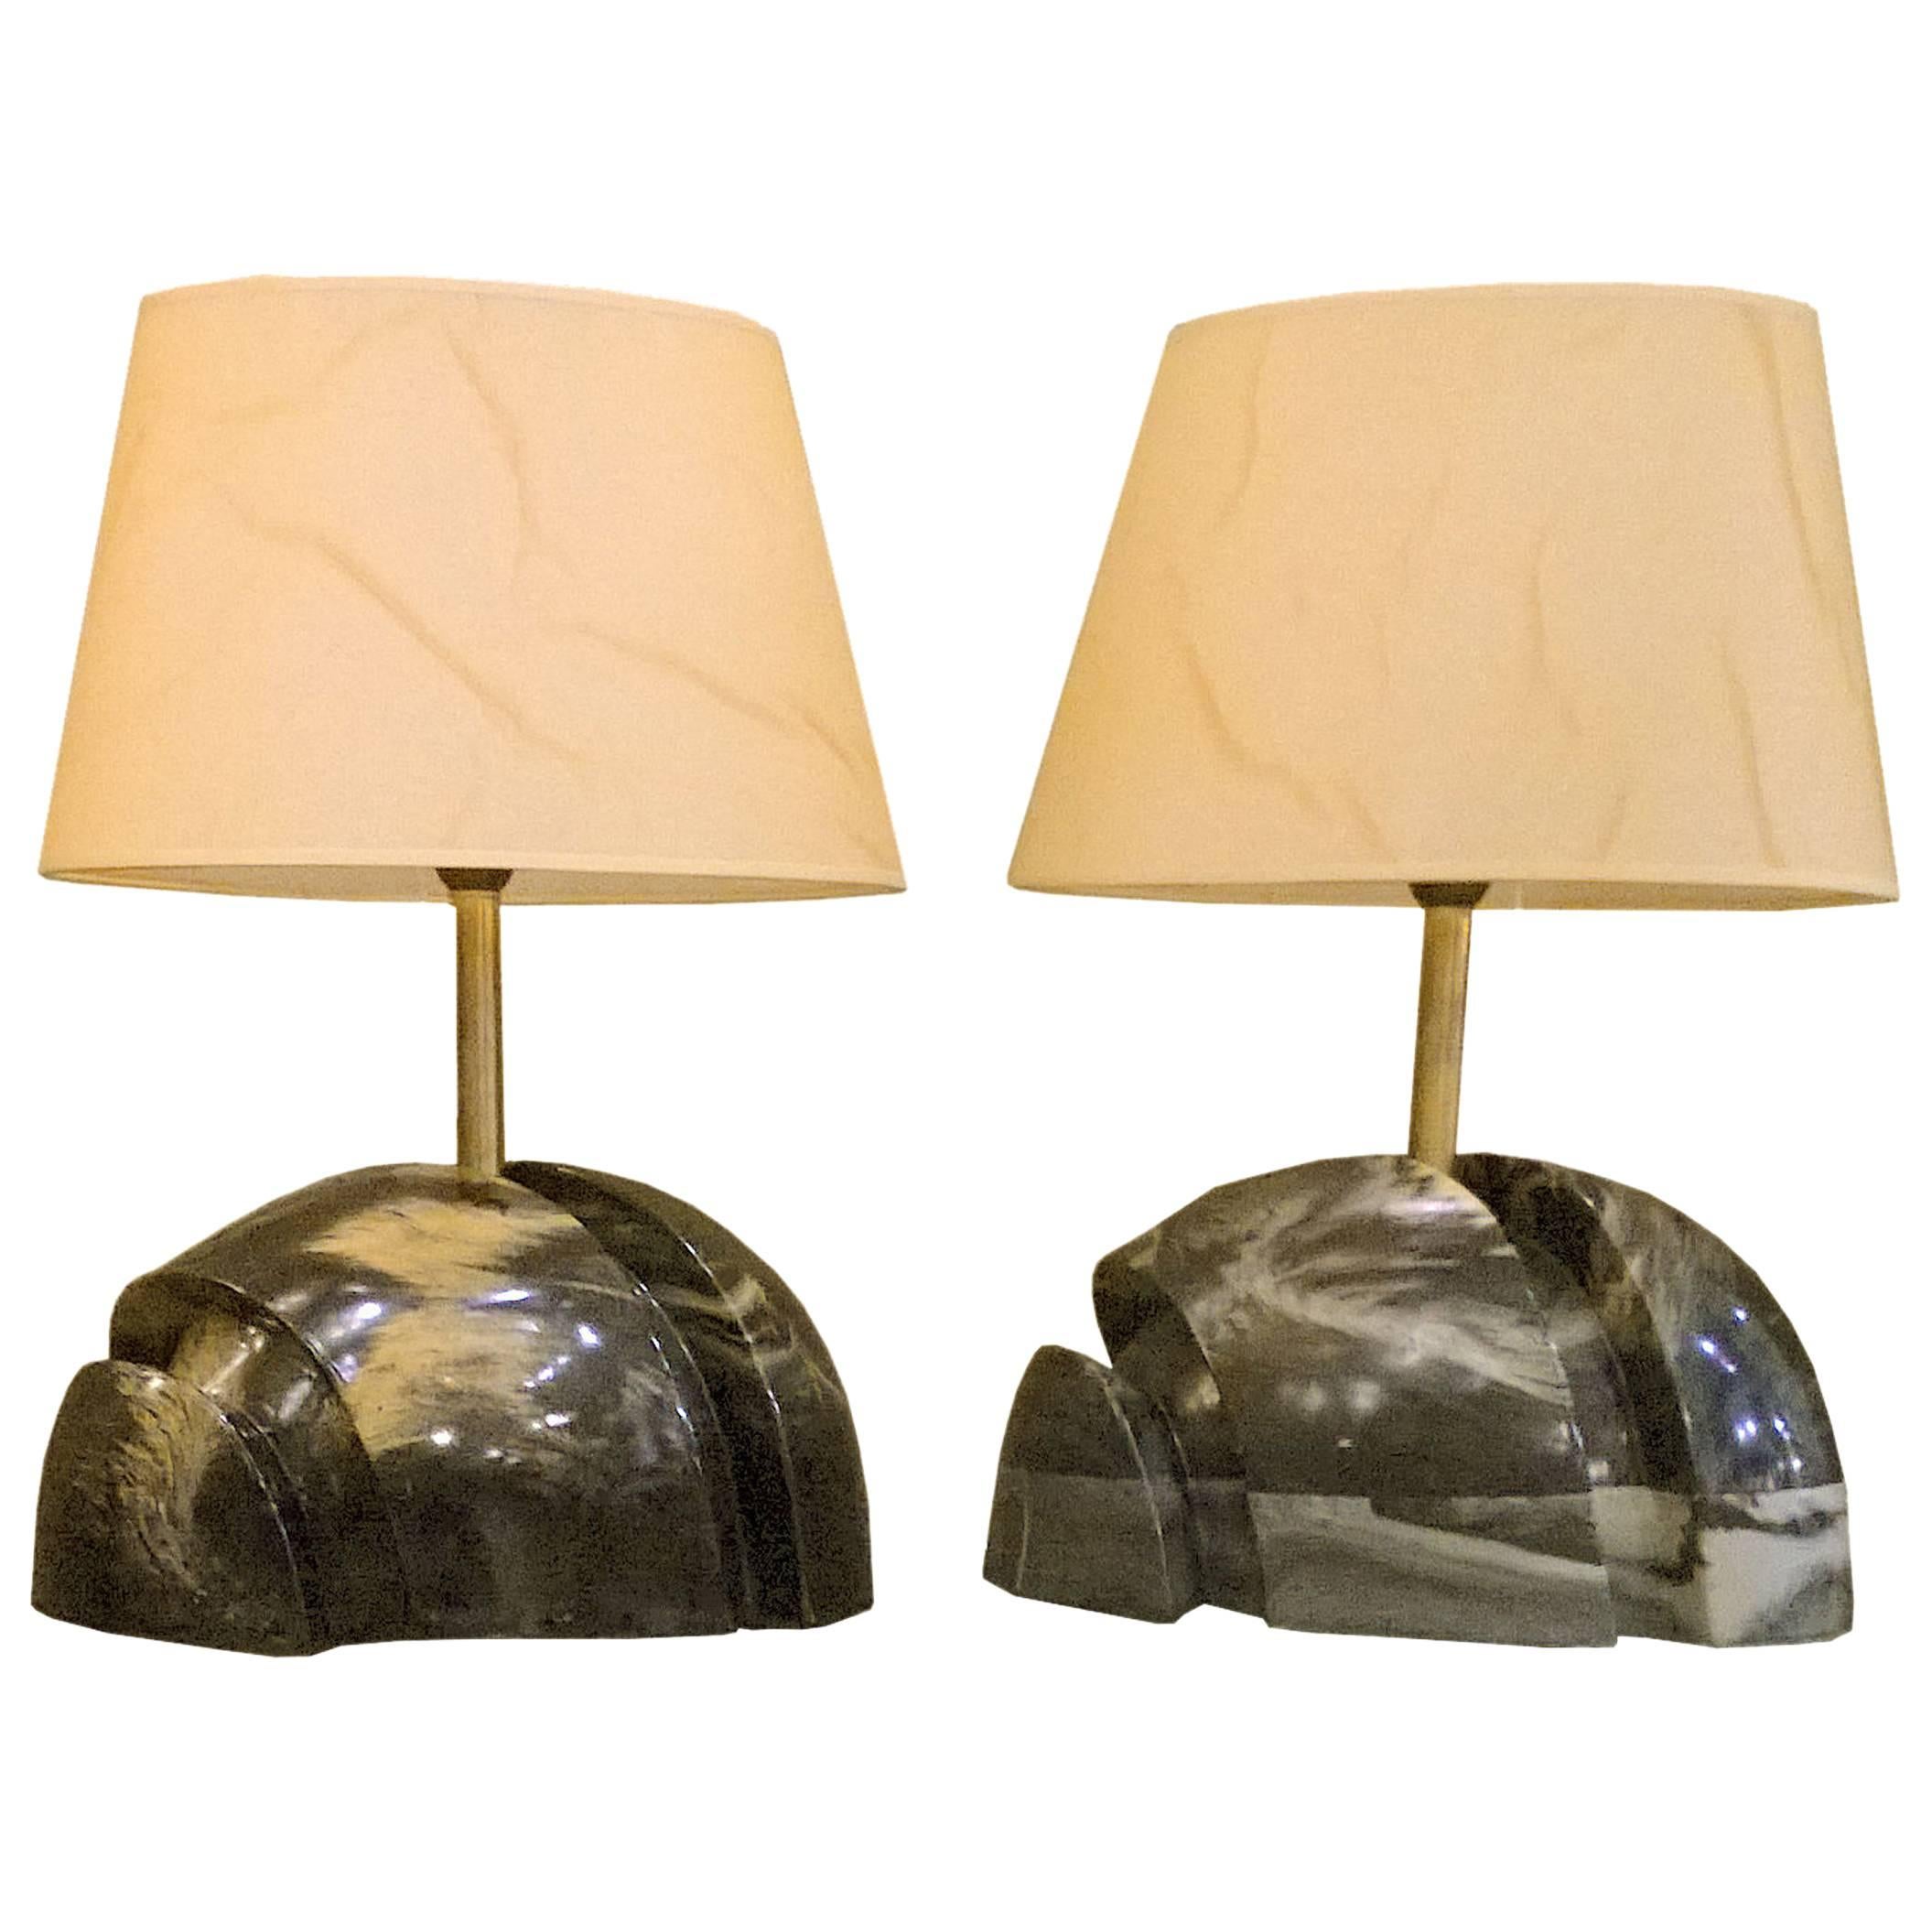 Pair of Sculptural Mid-Century Marble Lamps